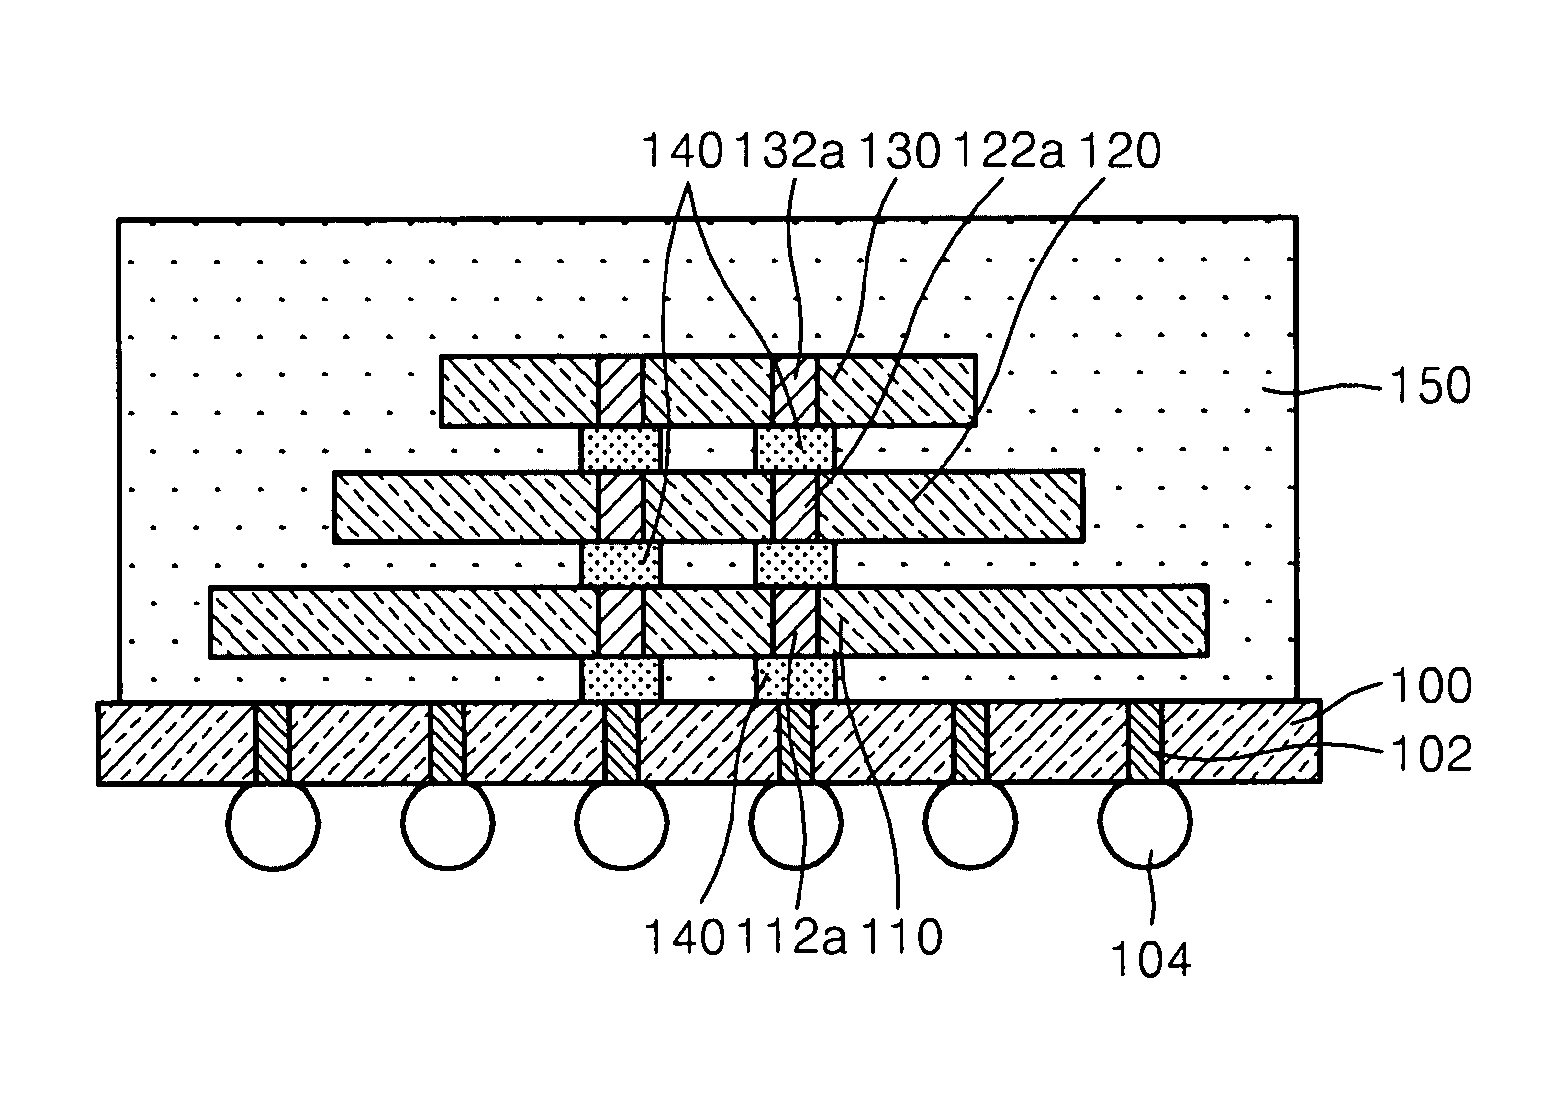 Multi-chip package having a stacked plurality of different sized semiconductor chips, and method of manufacturing the same